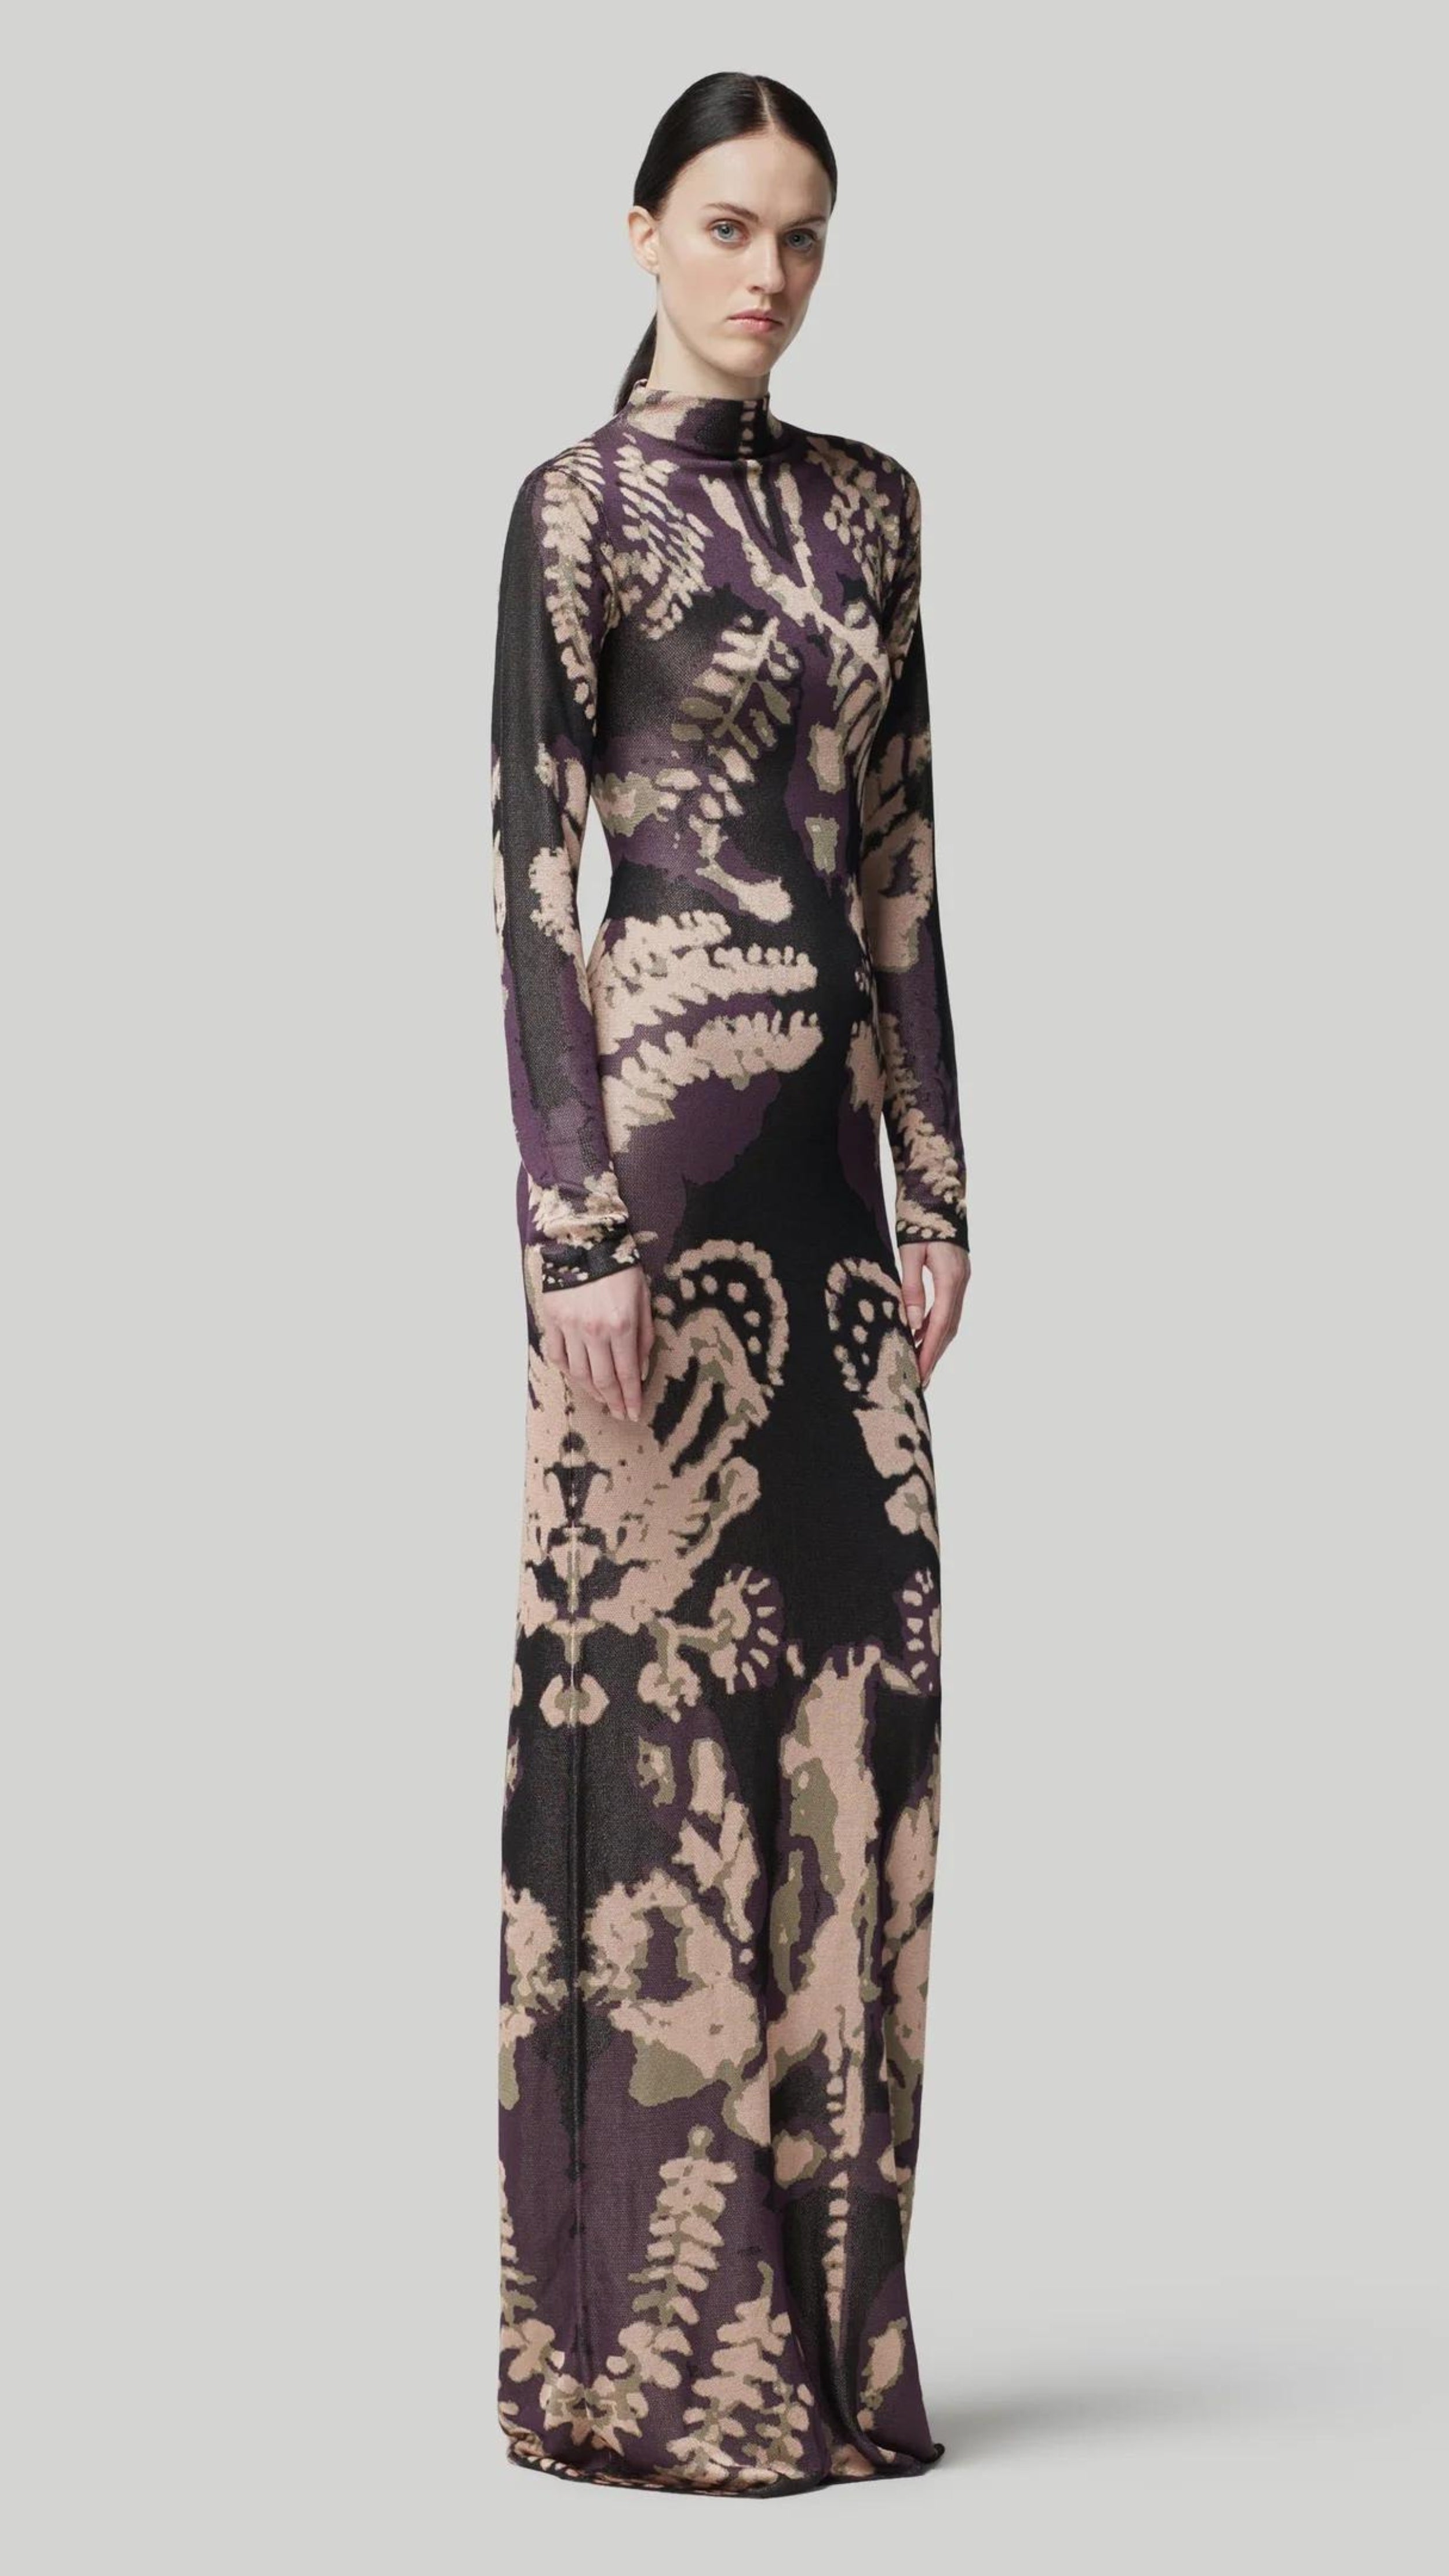 Altuzarra Rhea Dress. Knit dress in the rorschach in deep purple and pale pink. with a mock turtleneck, long sleeves and maxi length. Shown on model facing front